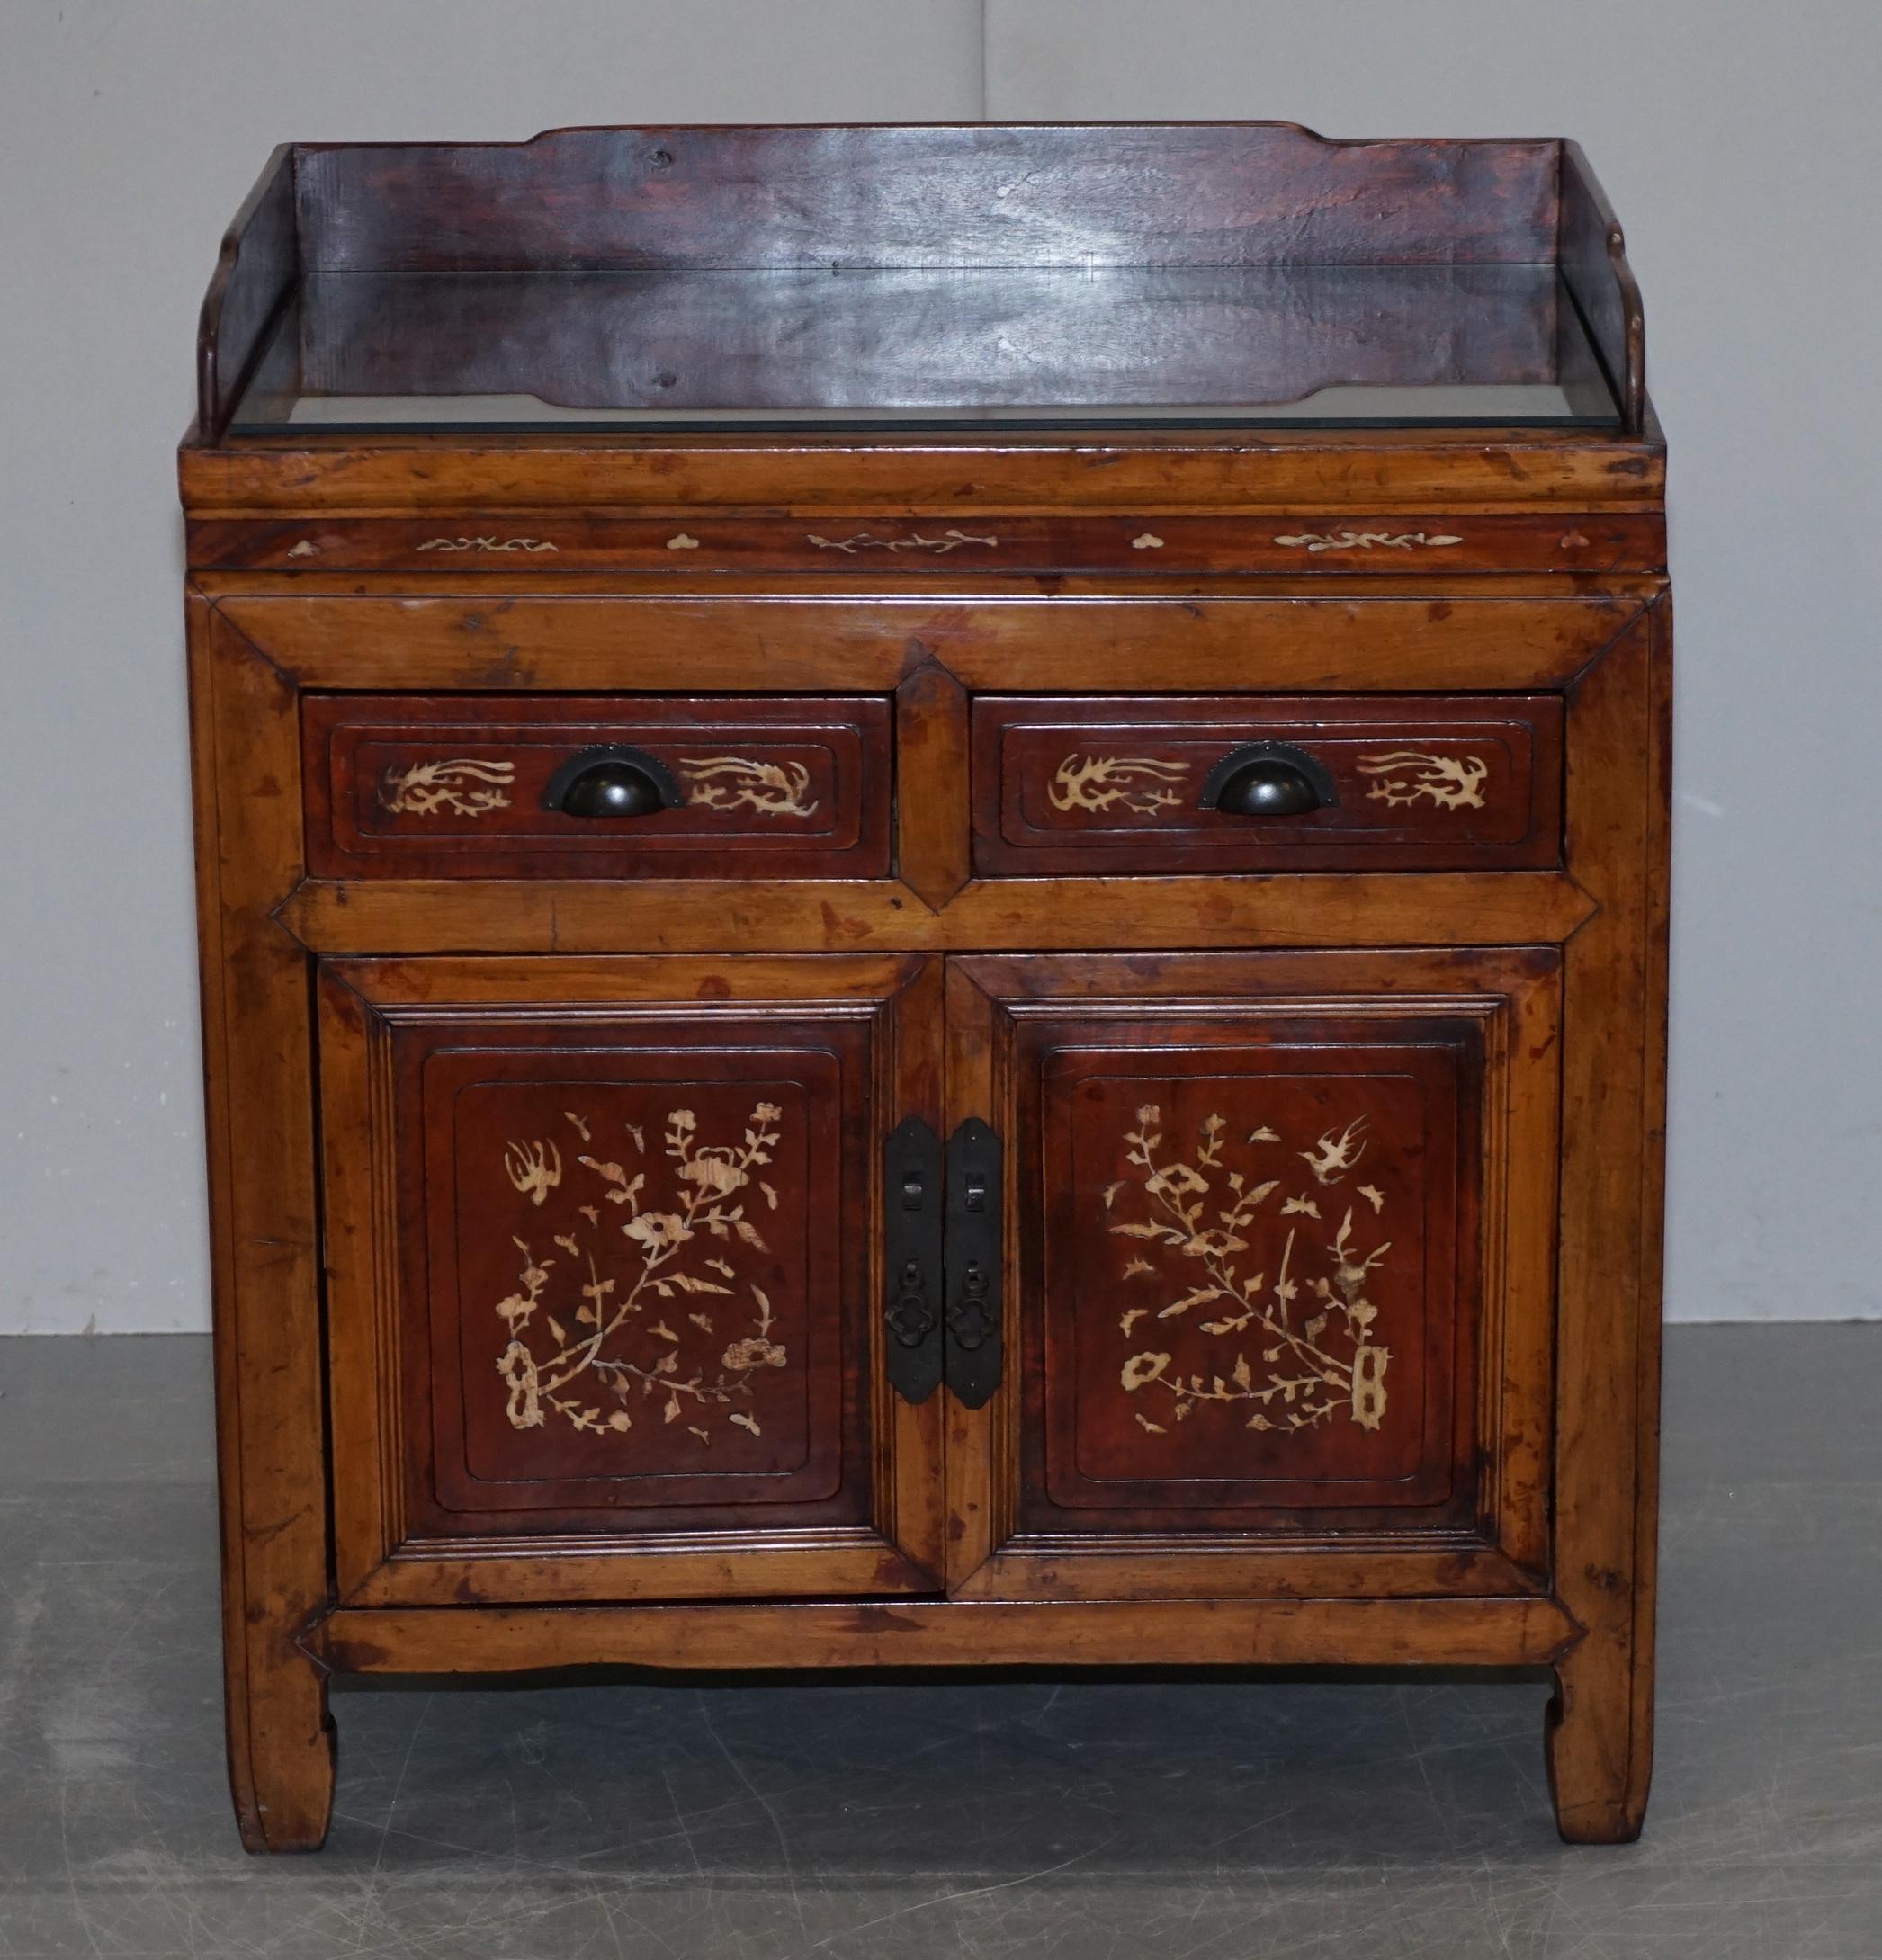 We are delighted to offer for sale this lovely circa 1900 Chinese Export redwood & inlaid wash stand sideboard with glass top 

A very good looking and well made decorative antique piece, the timber patina is sublime, it has a very rustic and